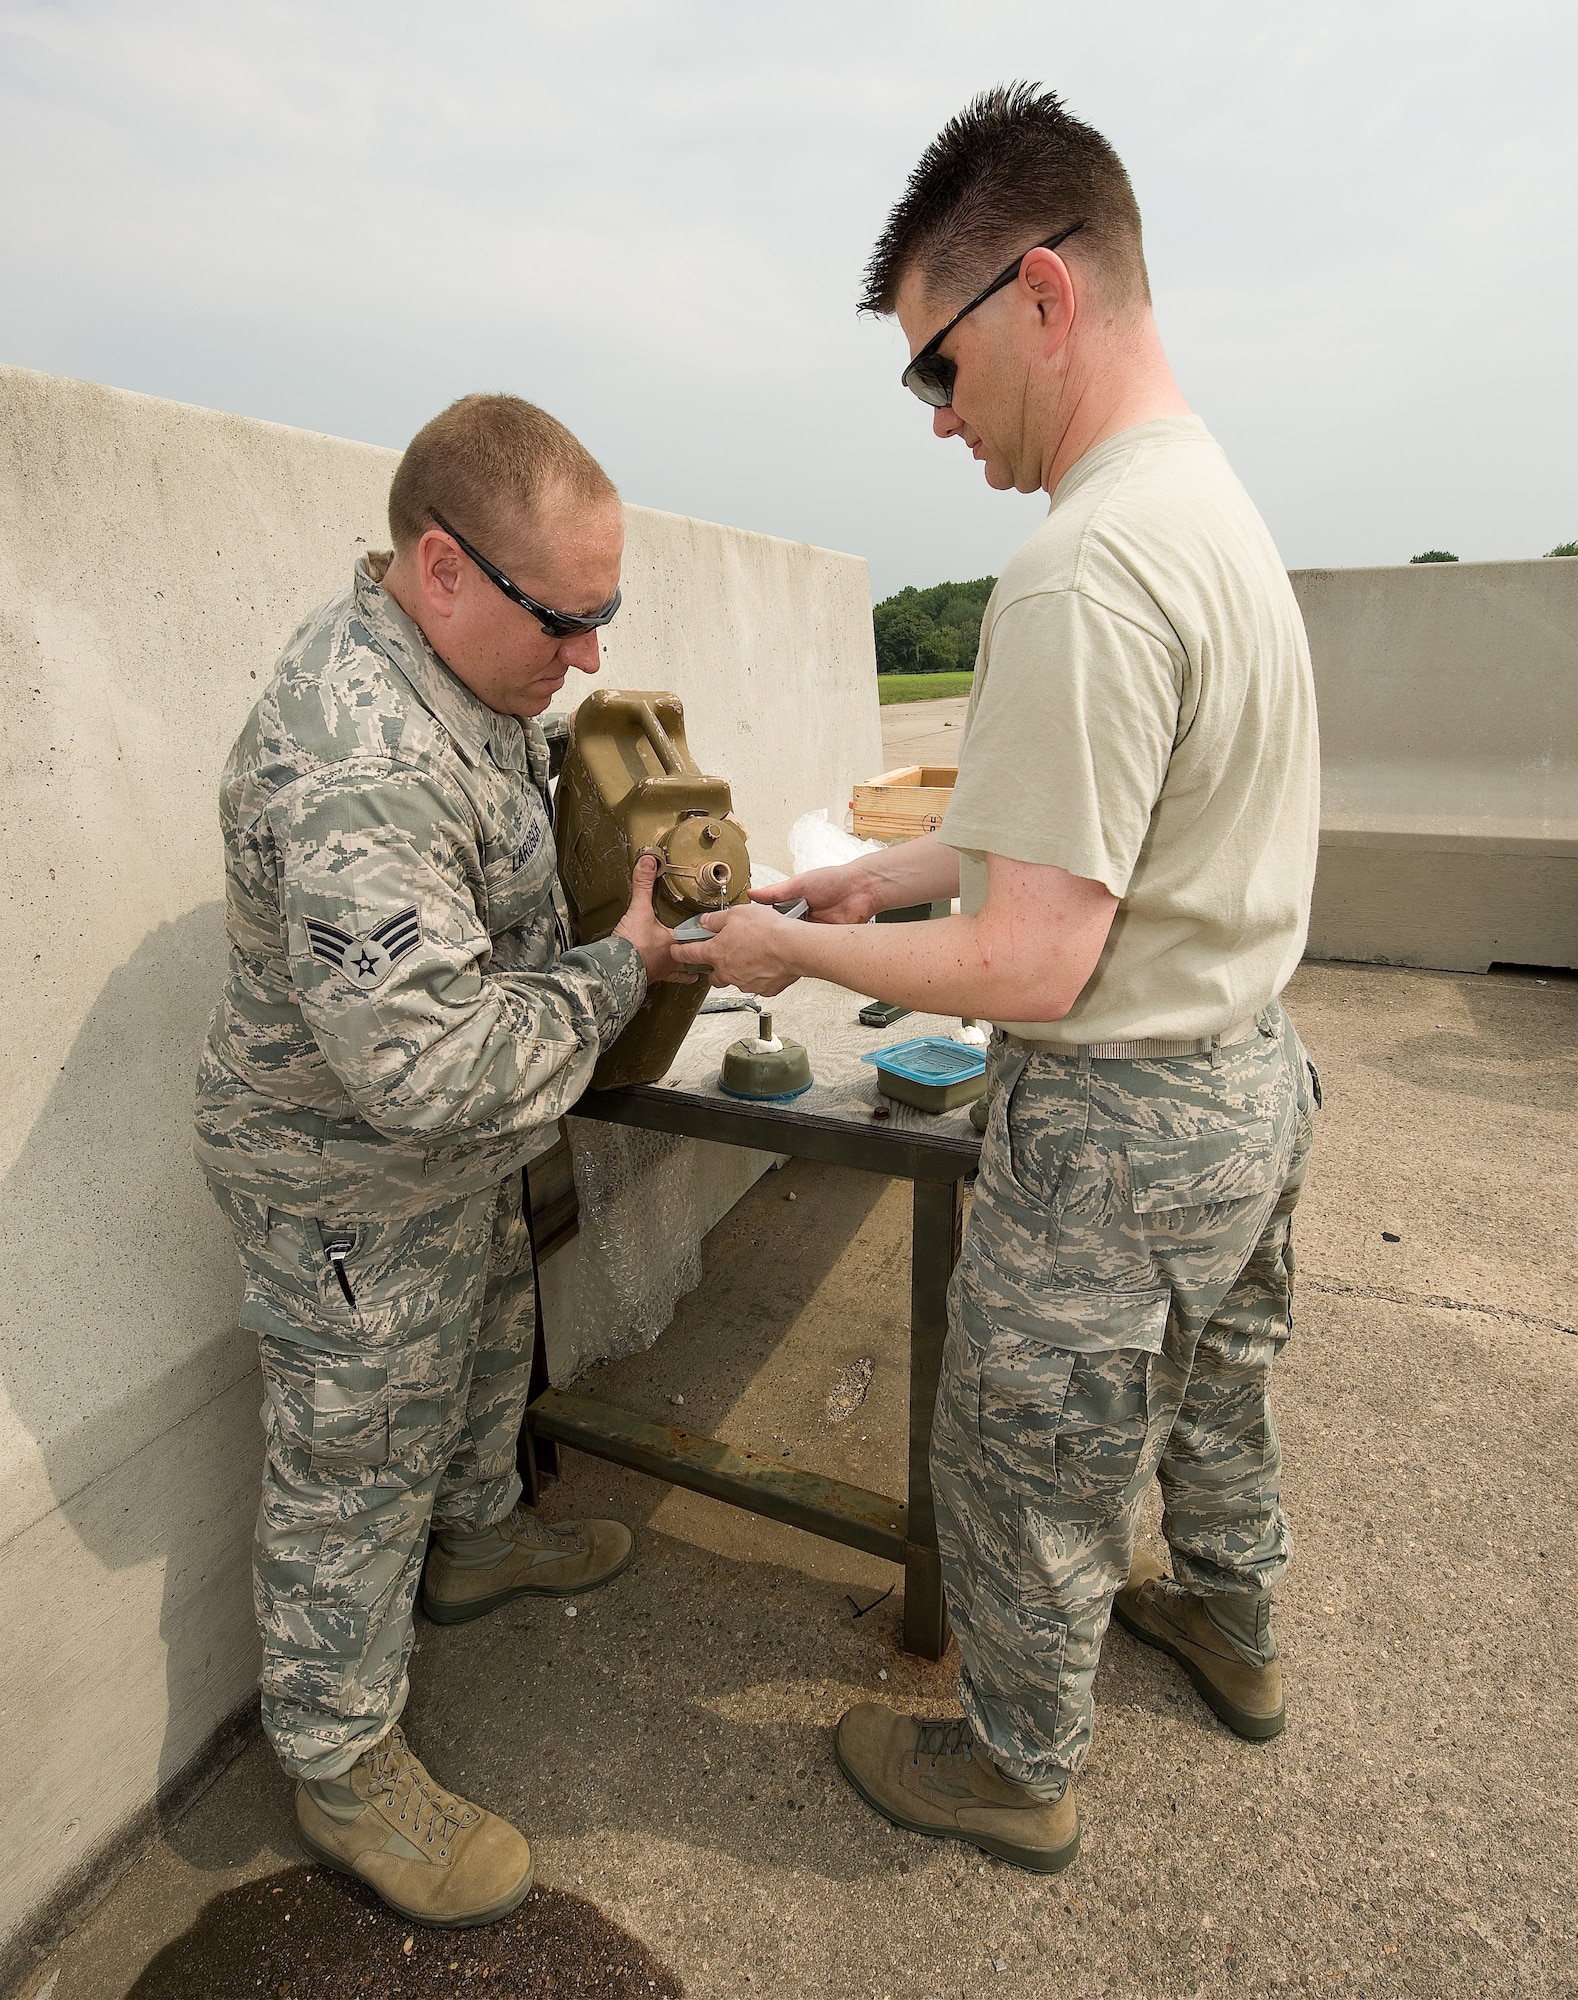 Senior Airman John Larosch, (left), 512th Civil Engineer Squadron Explosive Ordnance Disposal Flight technician fills a water charge with Staff Sgt. Christopher Erickson, 512th EOD technician, at the EOD range, July 29. The technicians were testing different theories of demolition as part of their training. Sergeant Erickson and Airman Larosch are two of seven reservists assigned to the 512th EOD Flight, Dover Air Force Base, Del. (U.S. Air Force photo/Jason Minto)